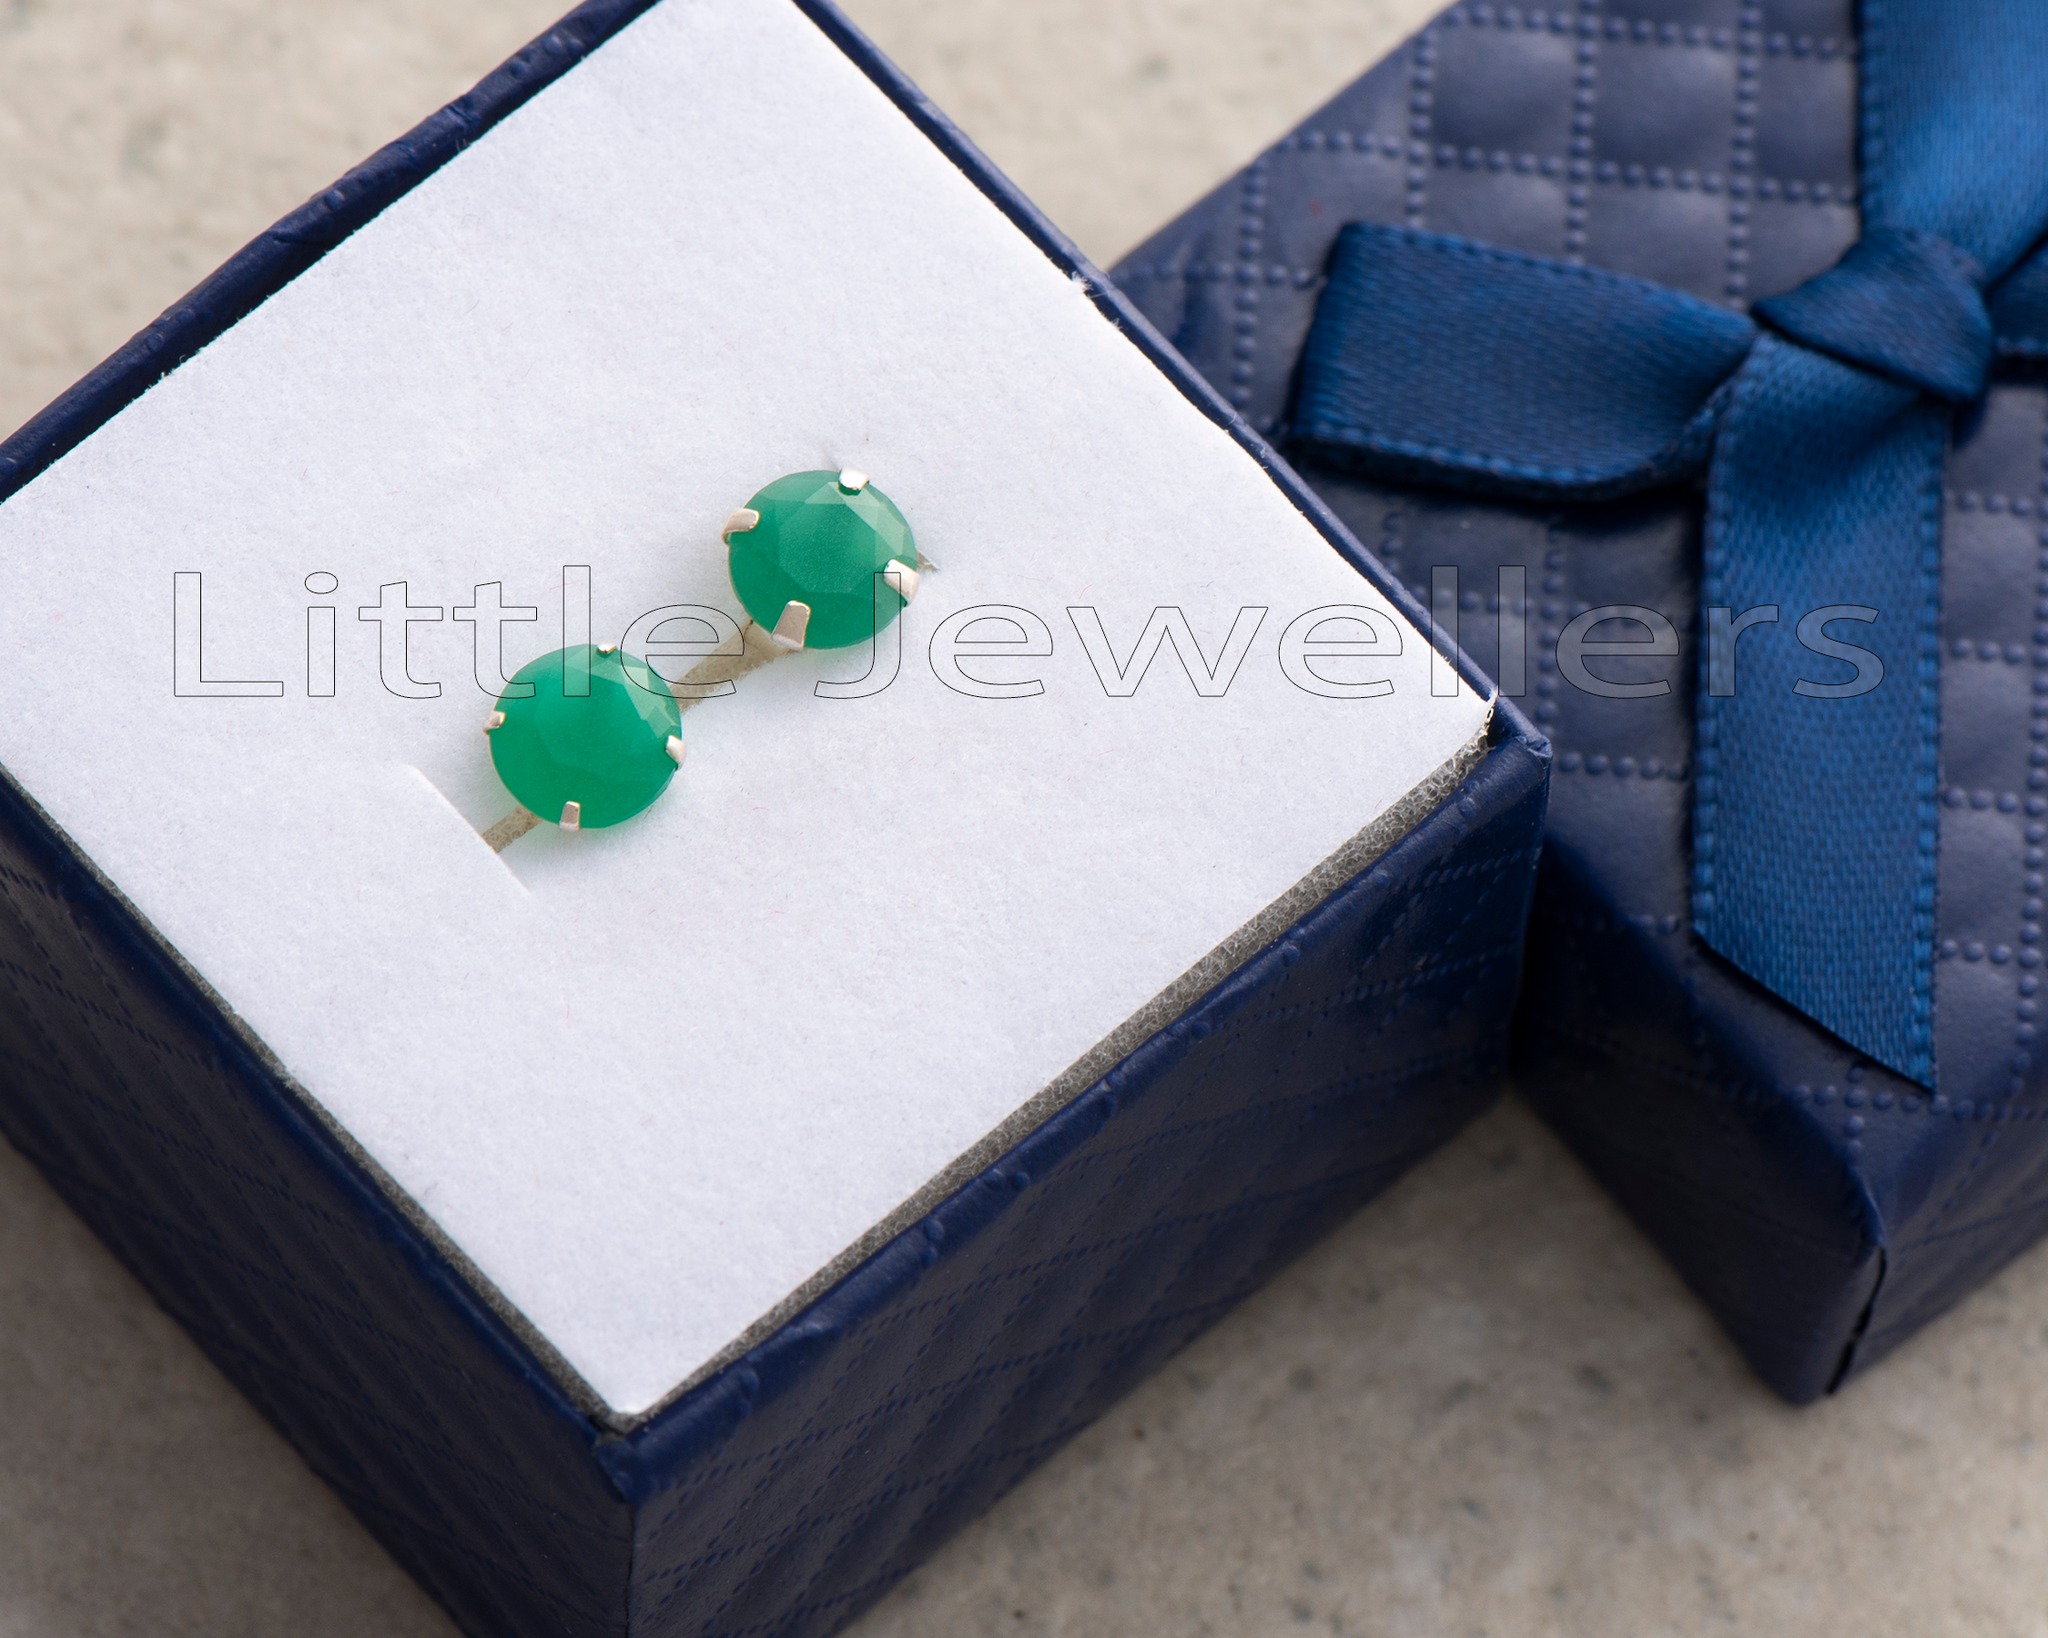 These beautiful stud earrings make an ideal choice for any occasion, especially as gifts for her. With their unique color and exceptional quality, these silver earrings are sure to be appreciated.